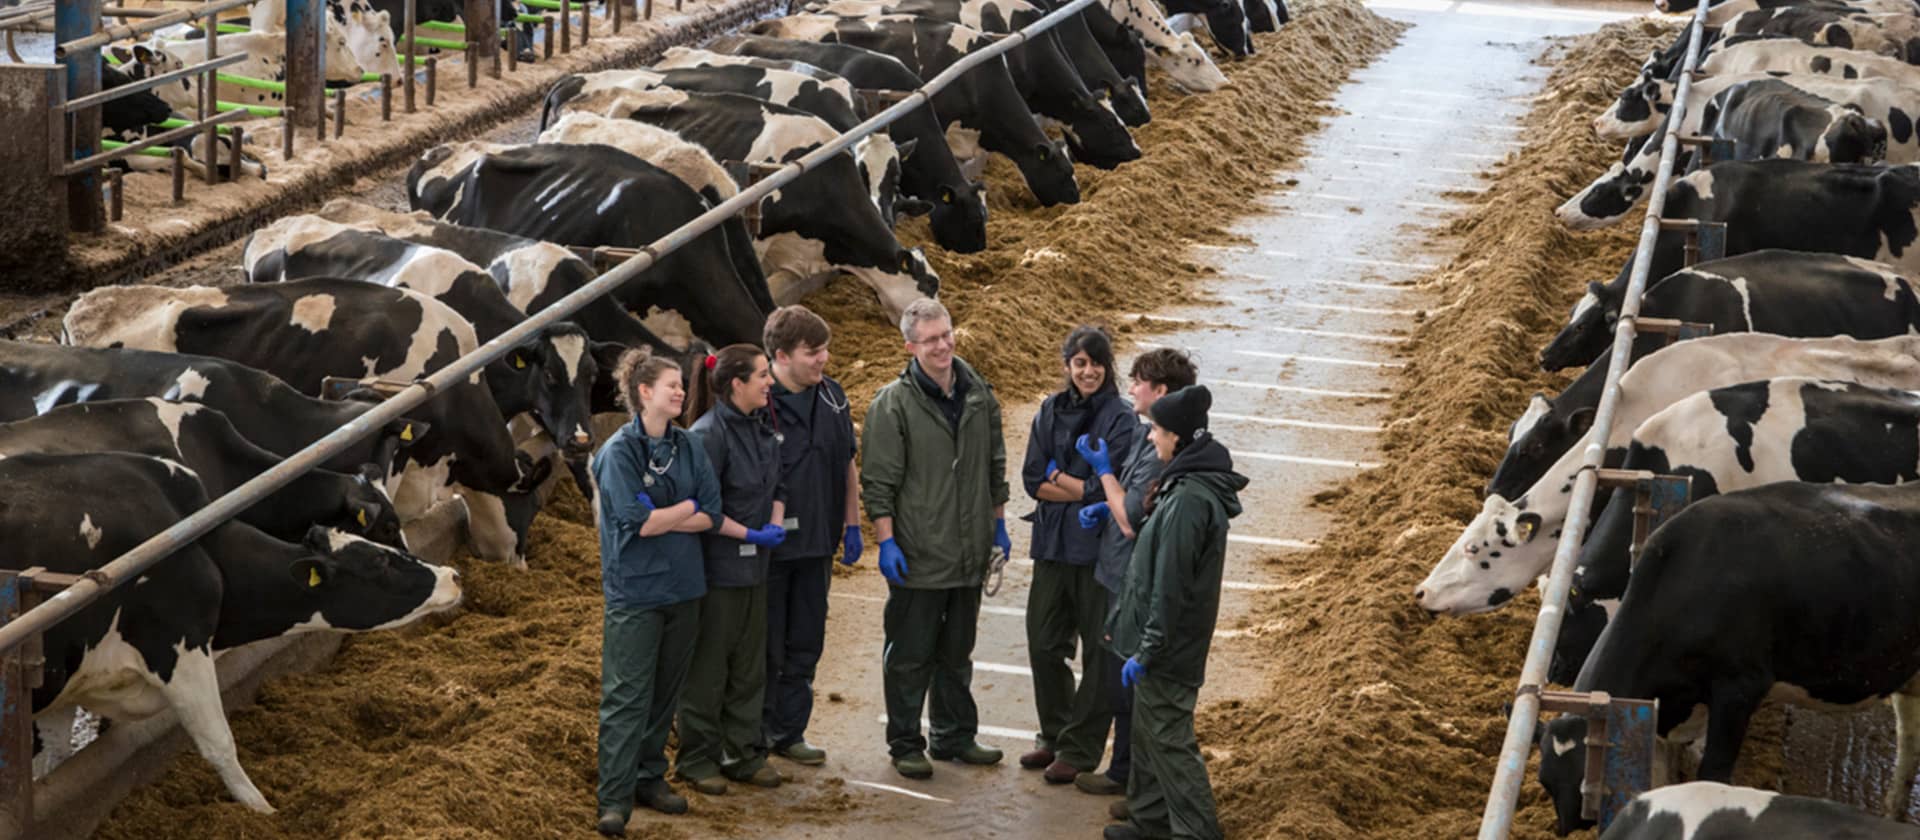 Group of students having a discussion in cow barn